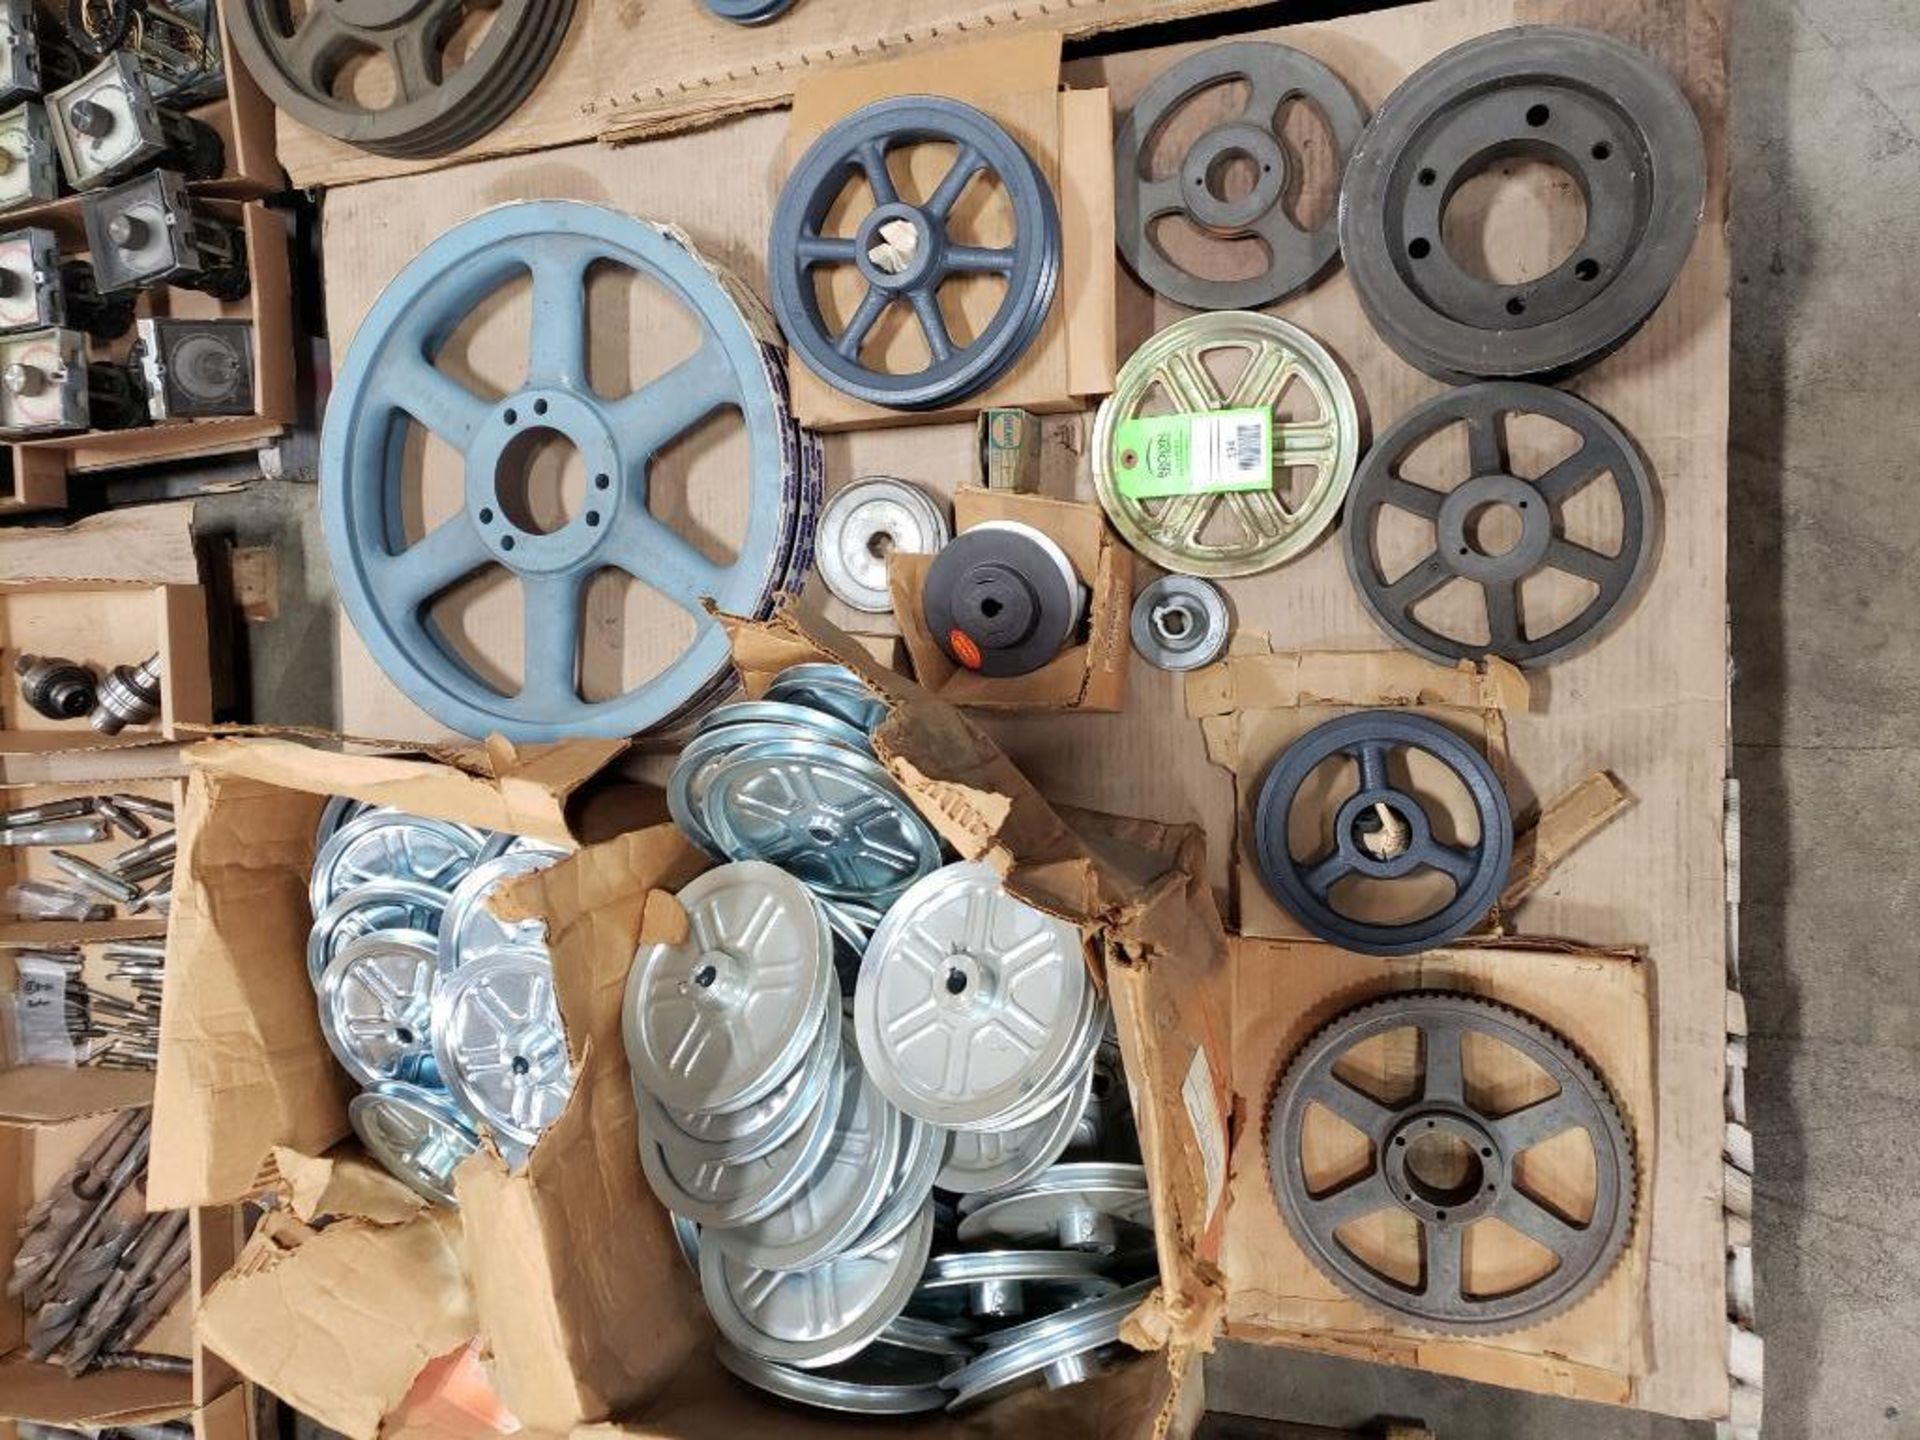 Pallet of assorted bushings, sprockets, pulleys, etc. Most are new old stock.